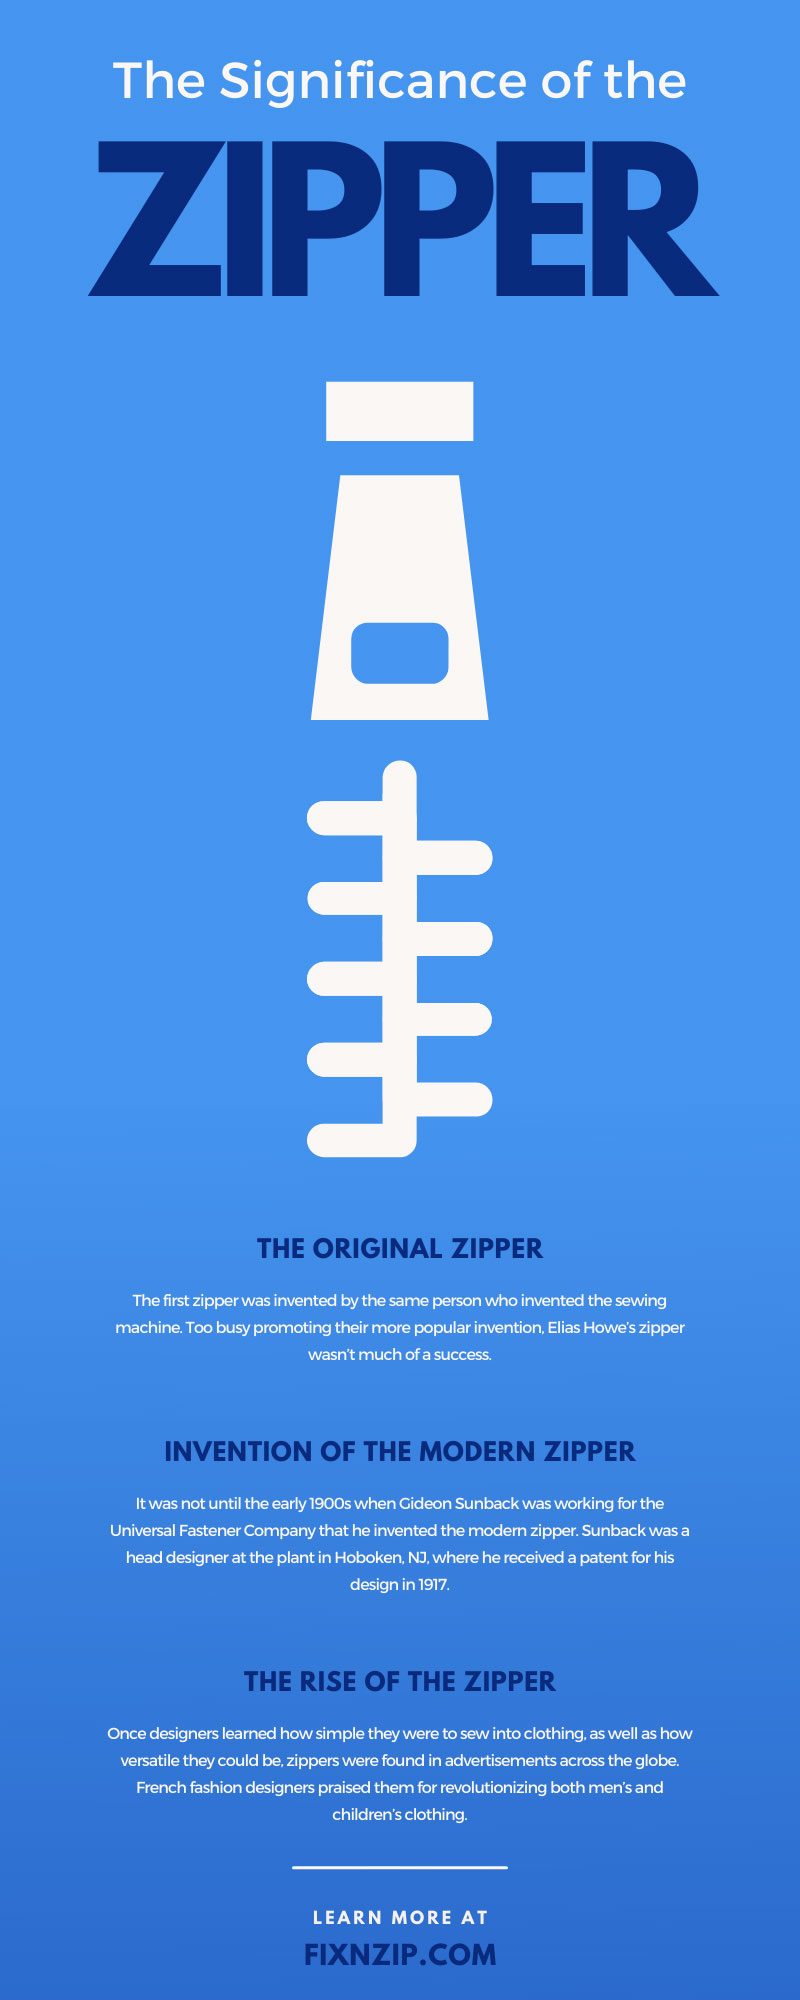 The Significance of the Zipper